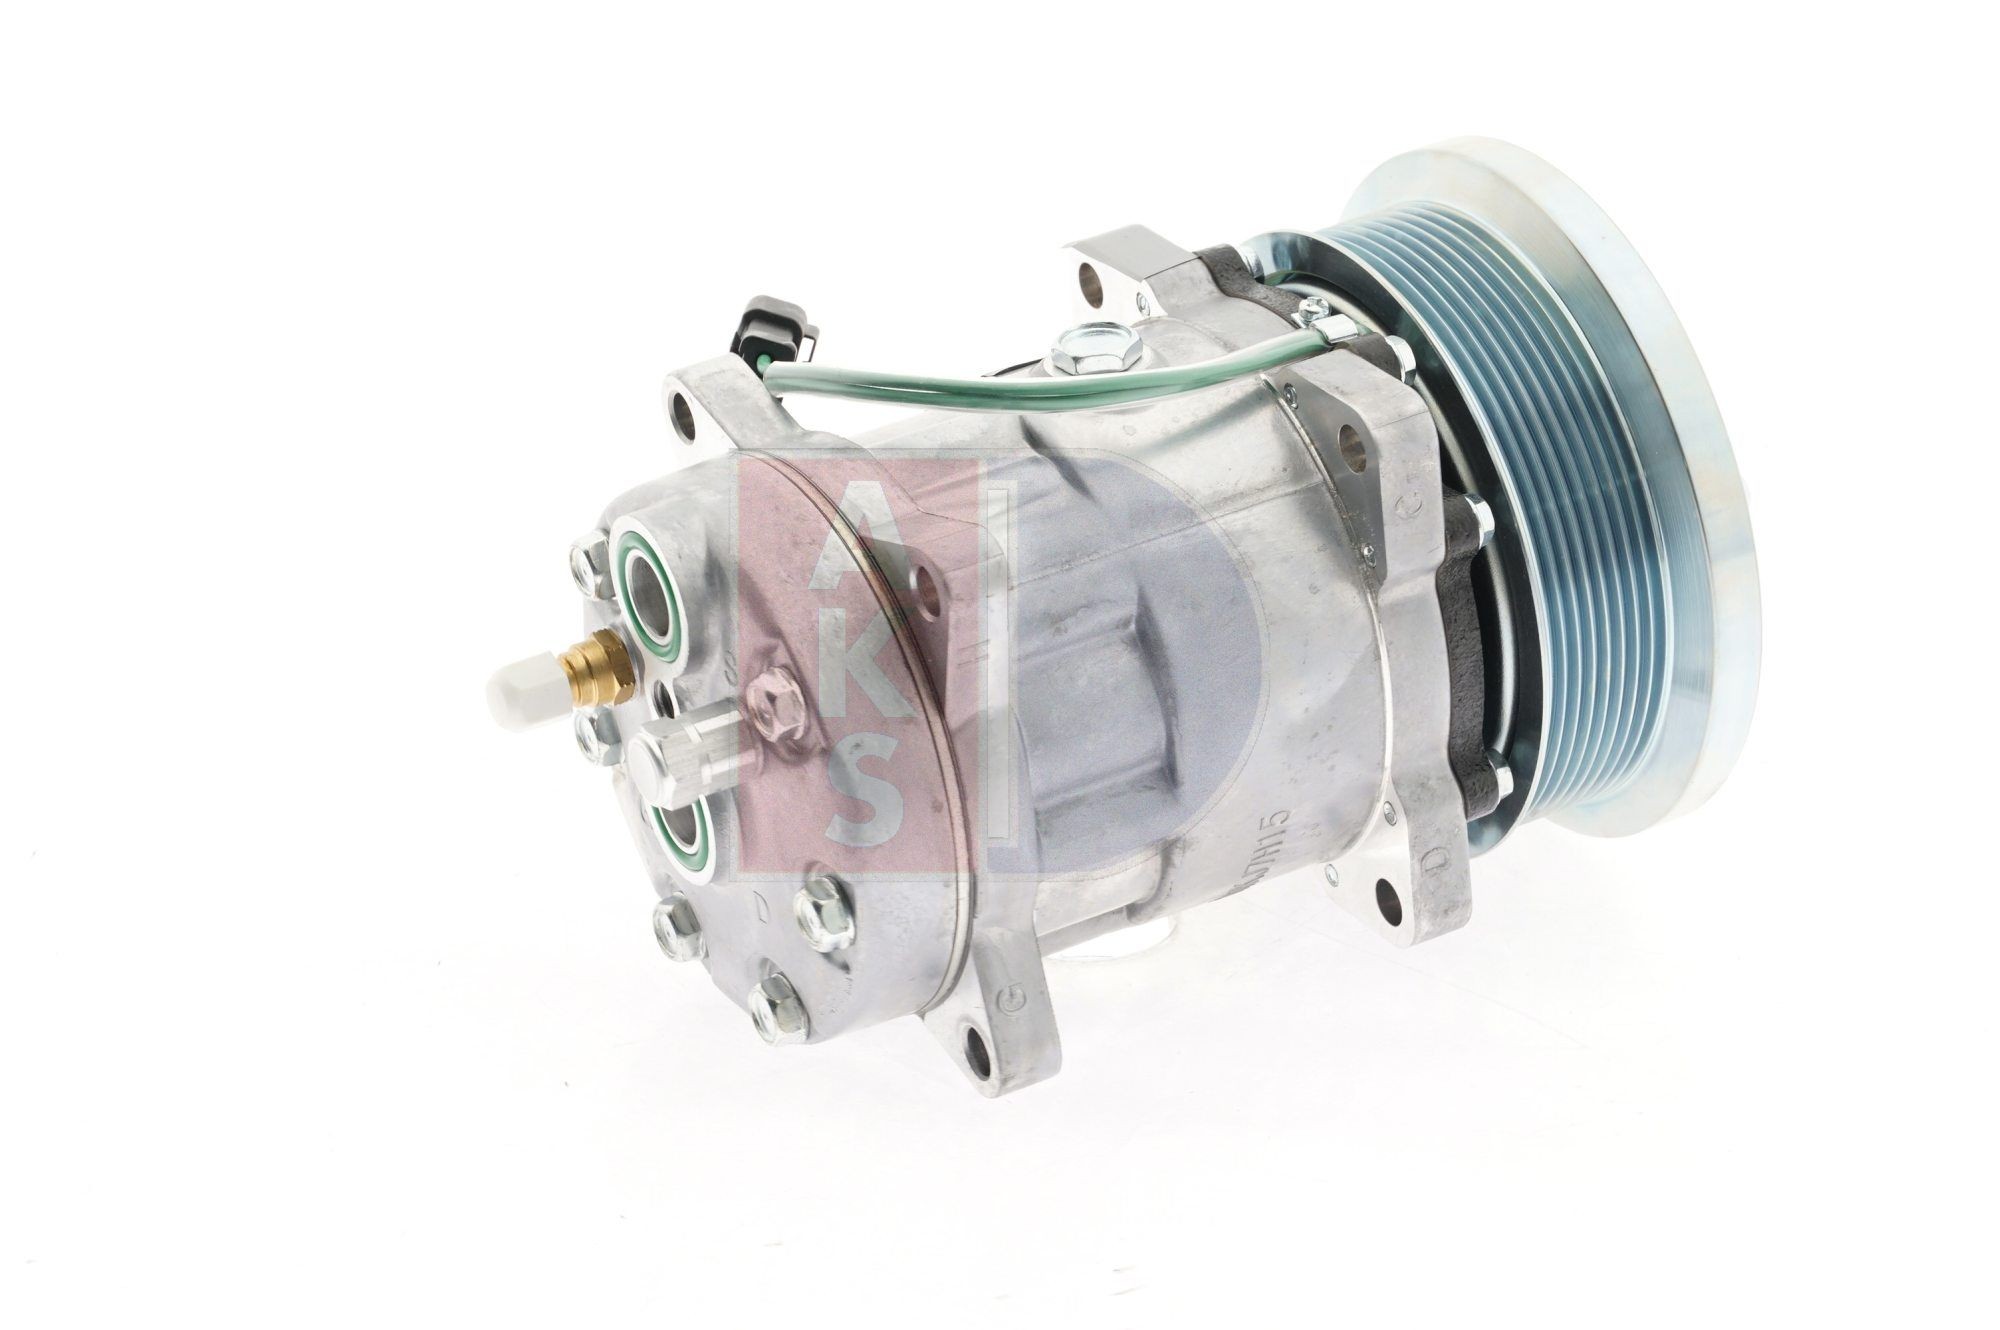 Air conditioning compressor 851774N from AKS DASIS